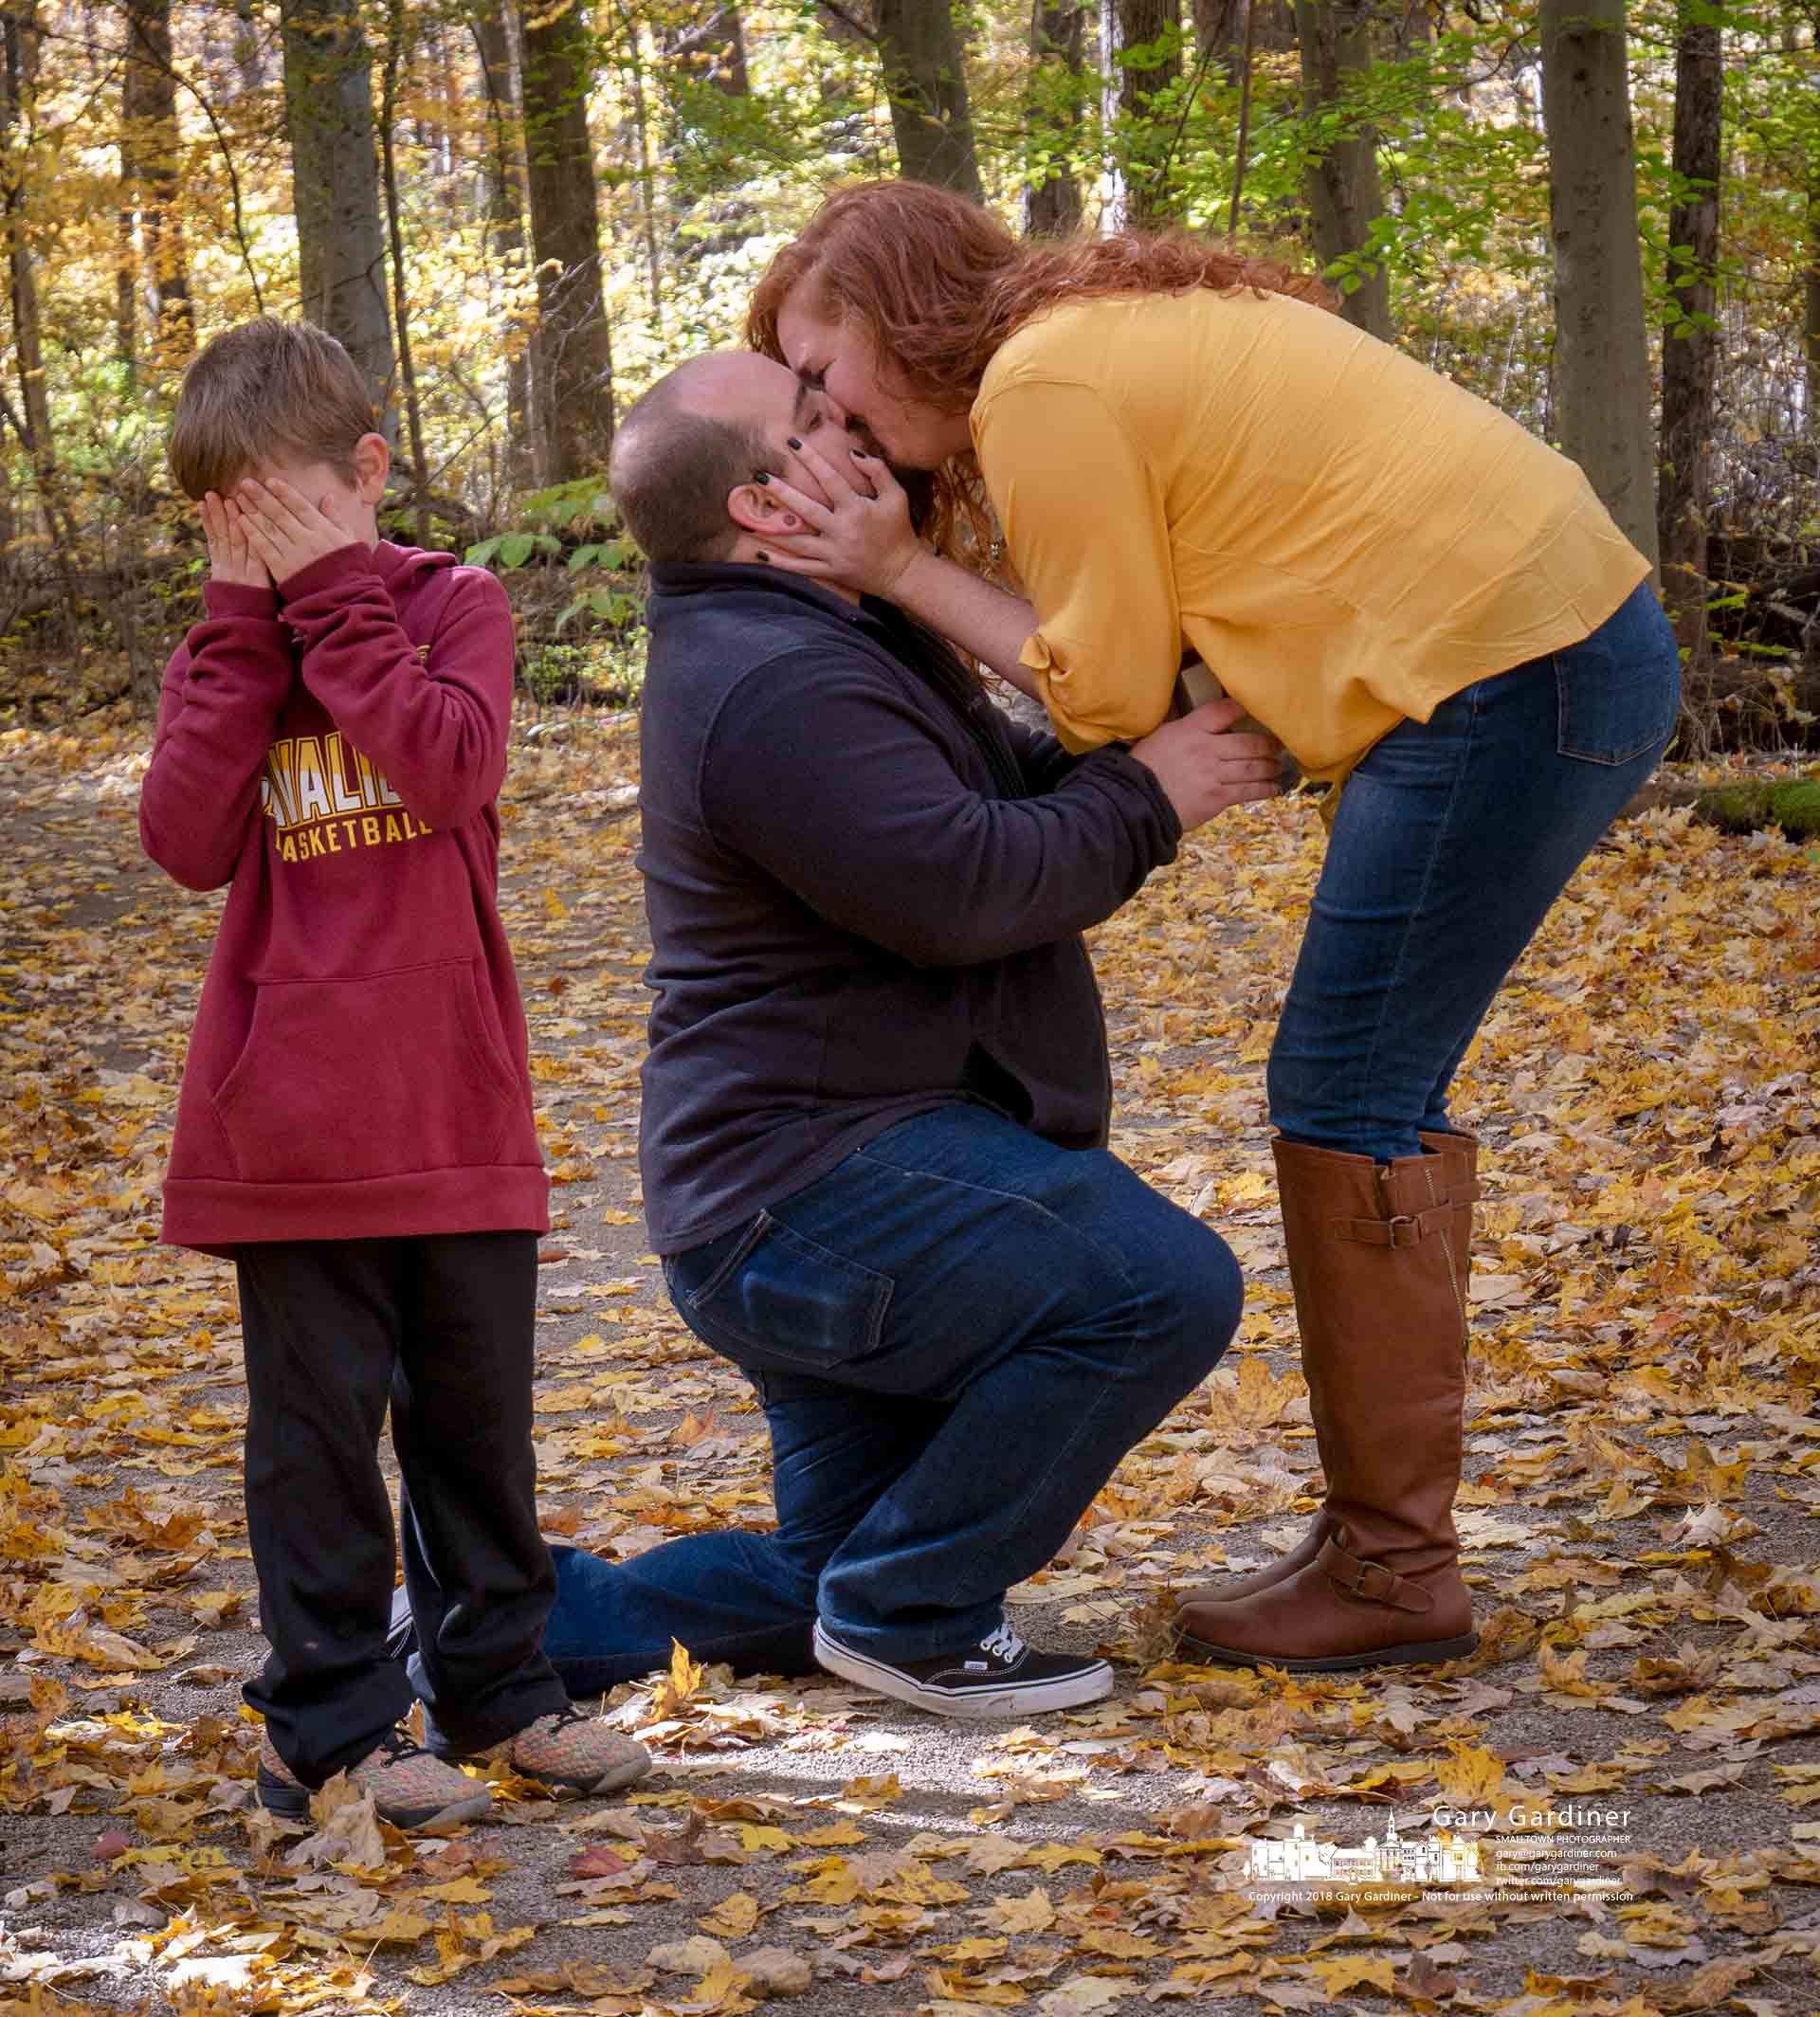 Eight-year-old Kai reacts as his father, Andy Rodriguez, proposes to Olivia Salyers on a trail at Blacklick Park. My Final Photo for Nov. 4, 2018.